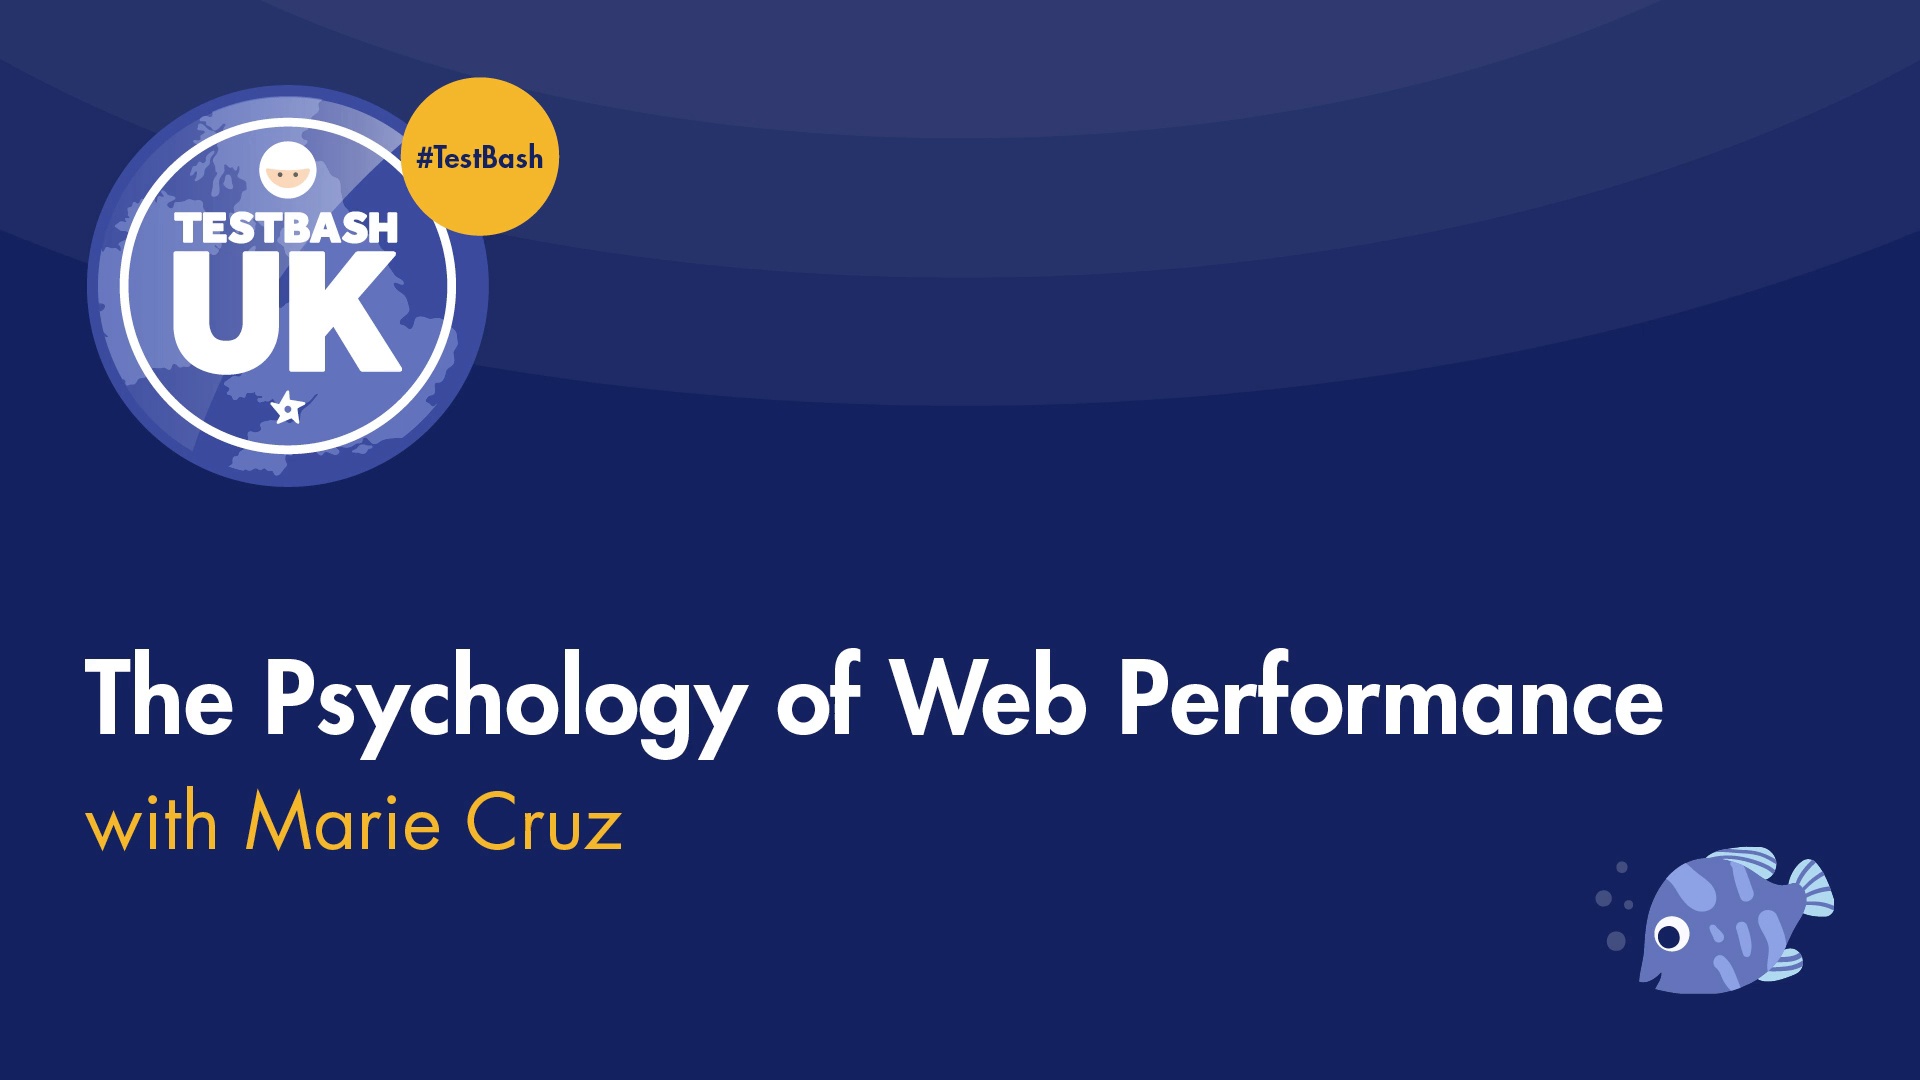 The Psychology of Web Performance